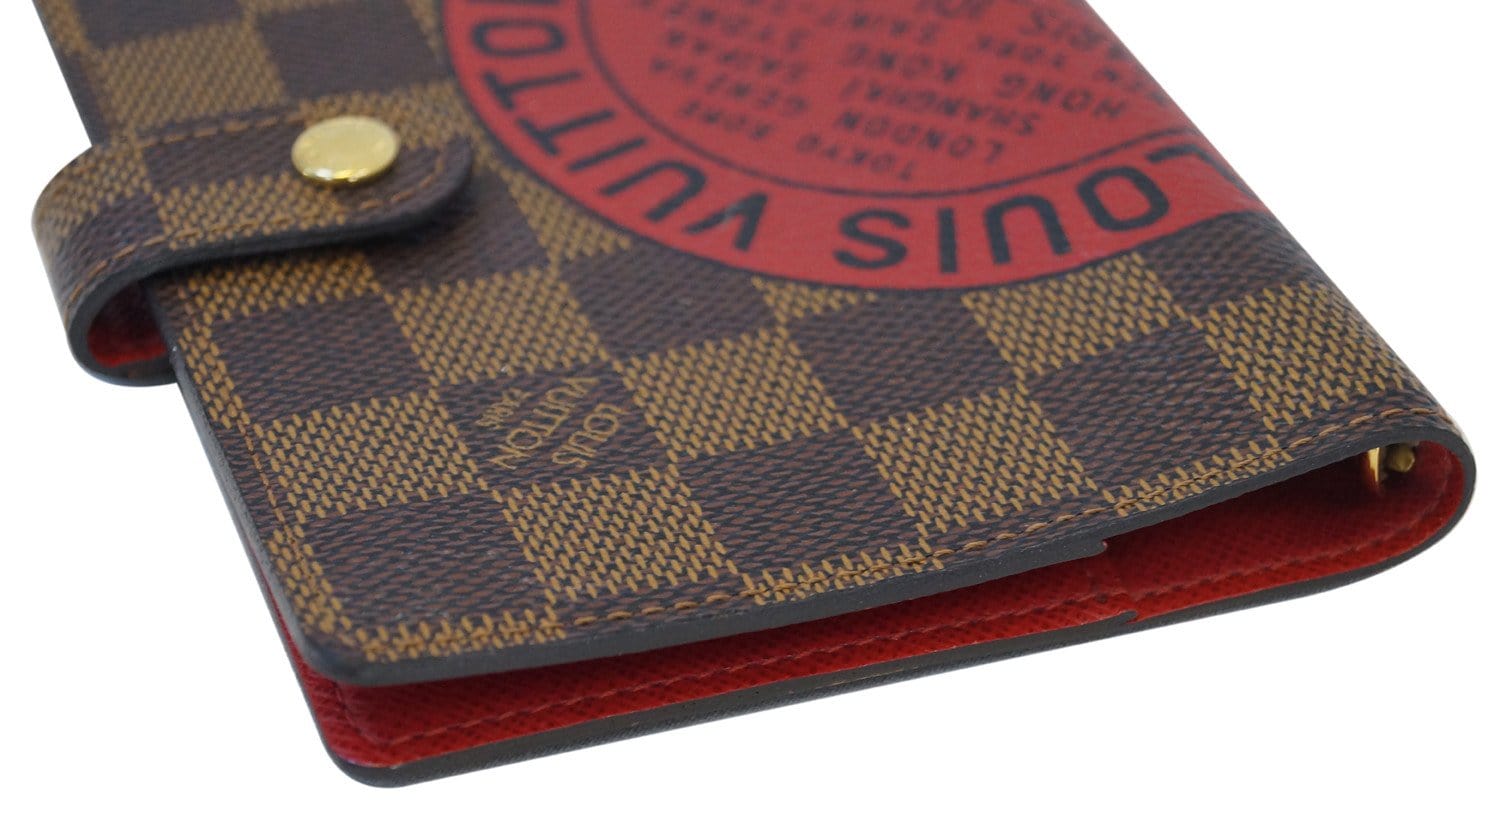 EIGHT Louis Vuitton Agenda PM Covers, all B grade or better